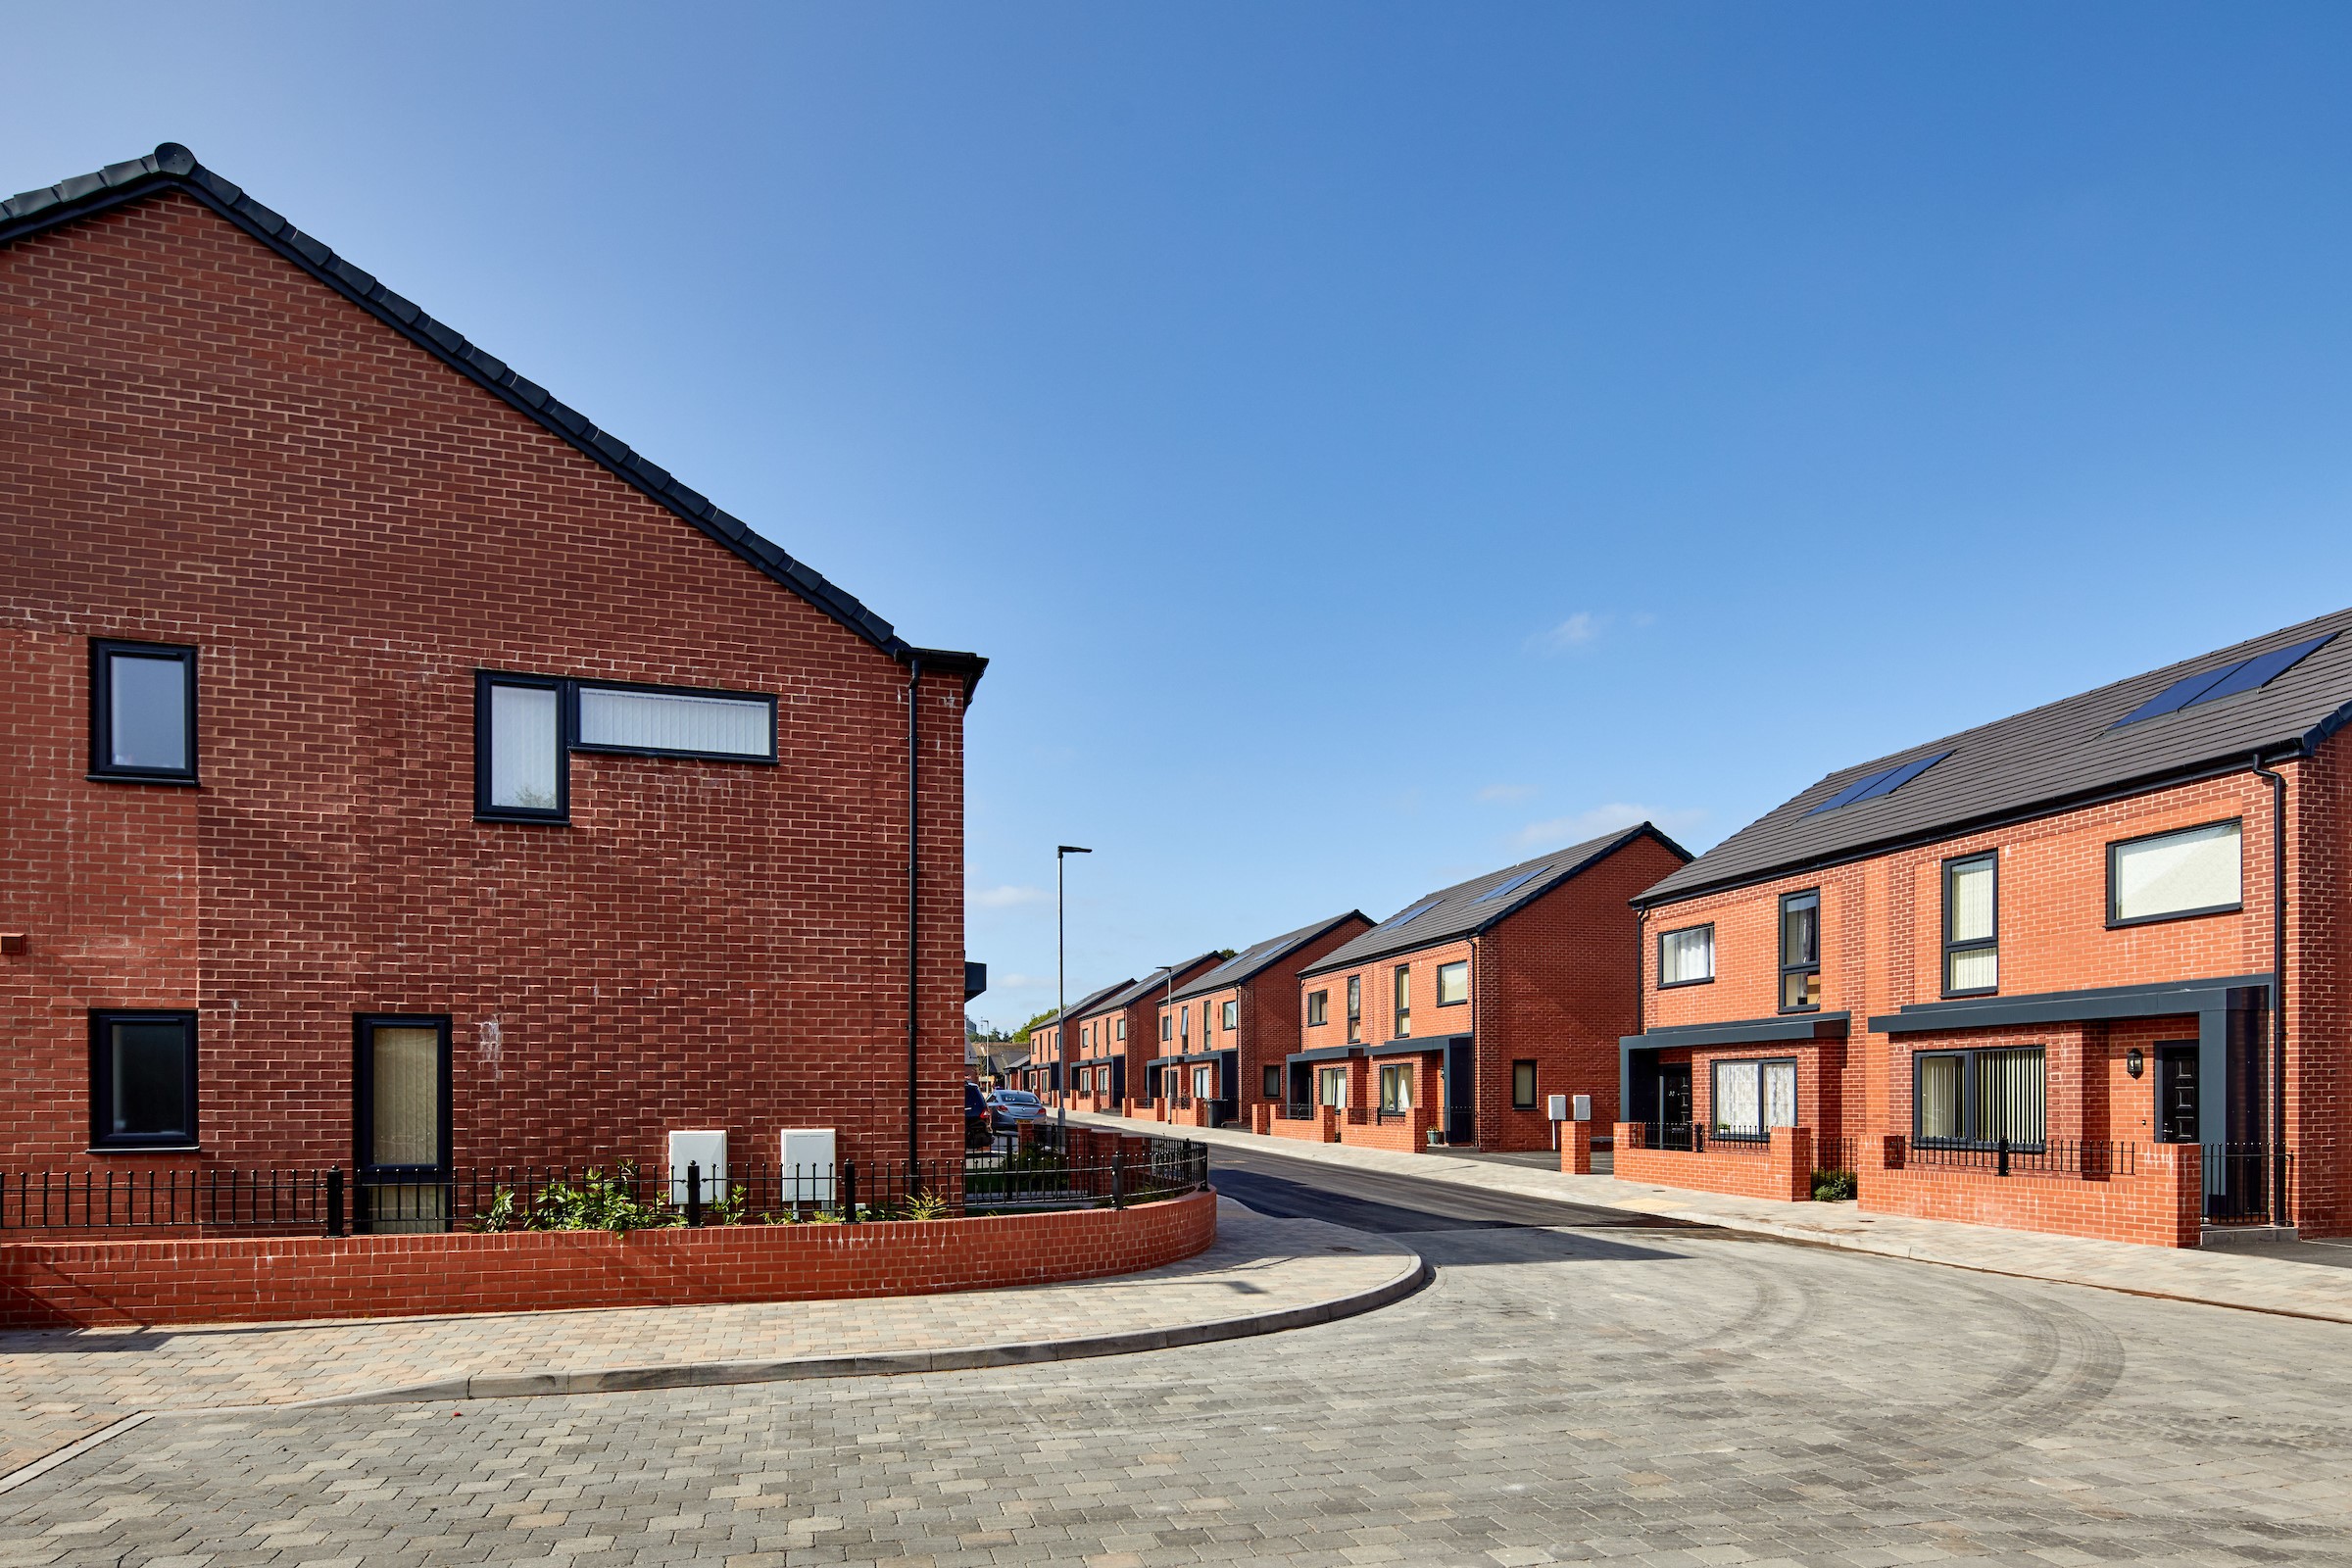 Photo of street of affordable homes in Heath Town, Birmingham